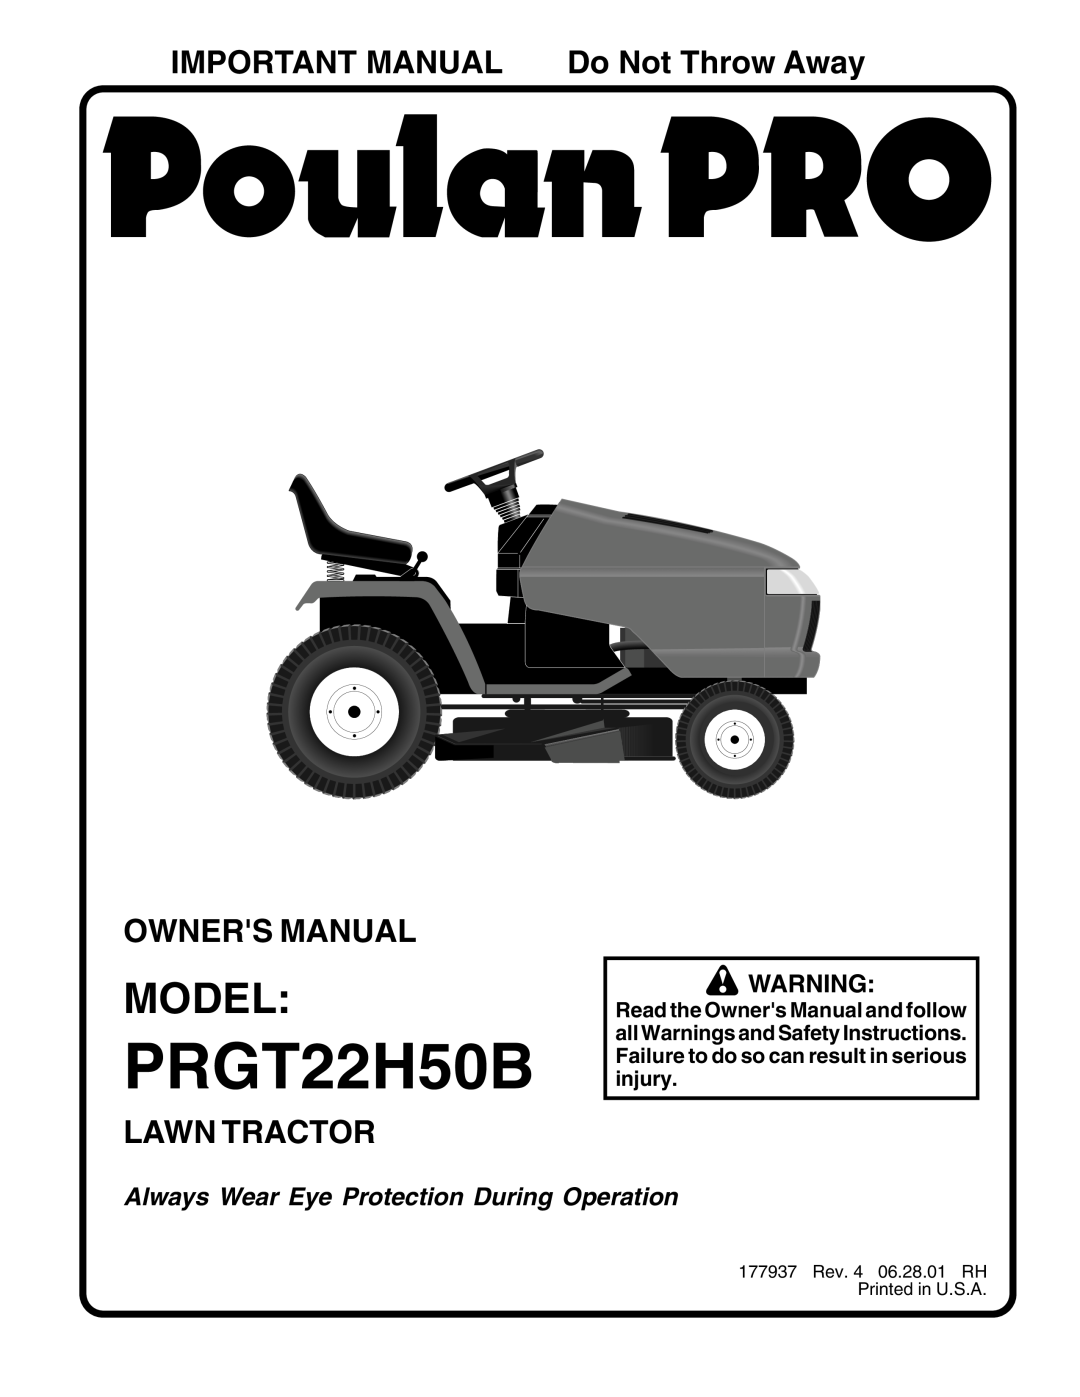 Poulan PRGT22H50B owner manual Model, IMPORTANT MANUAL Do Not Throw Away, Lawn Tractor 